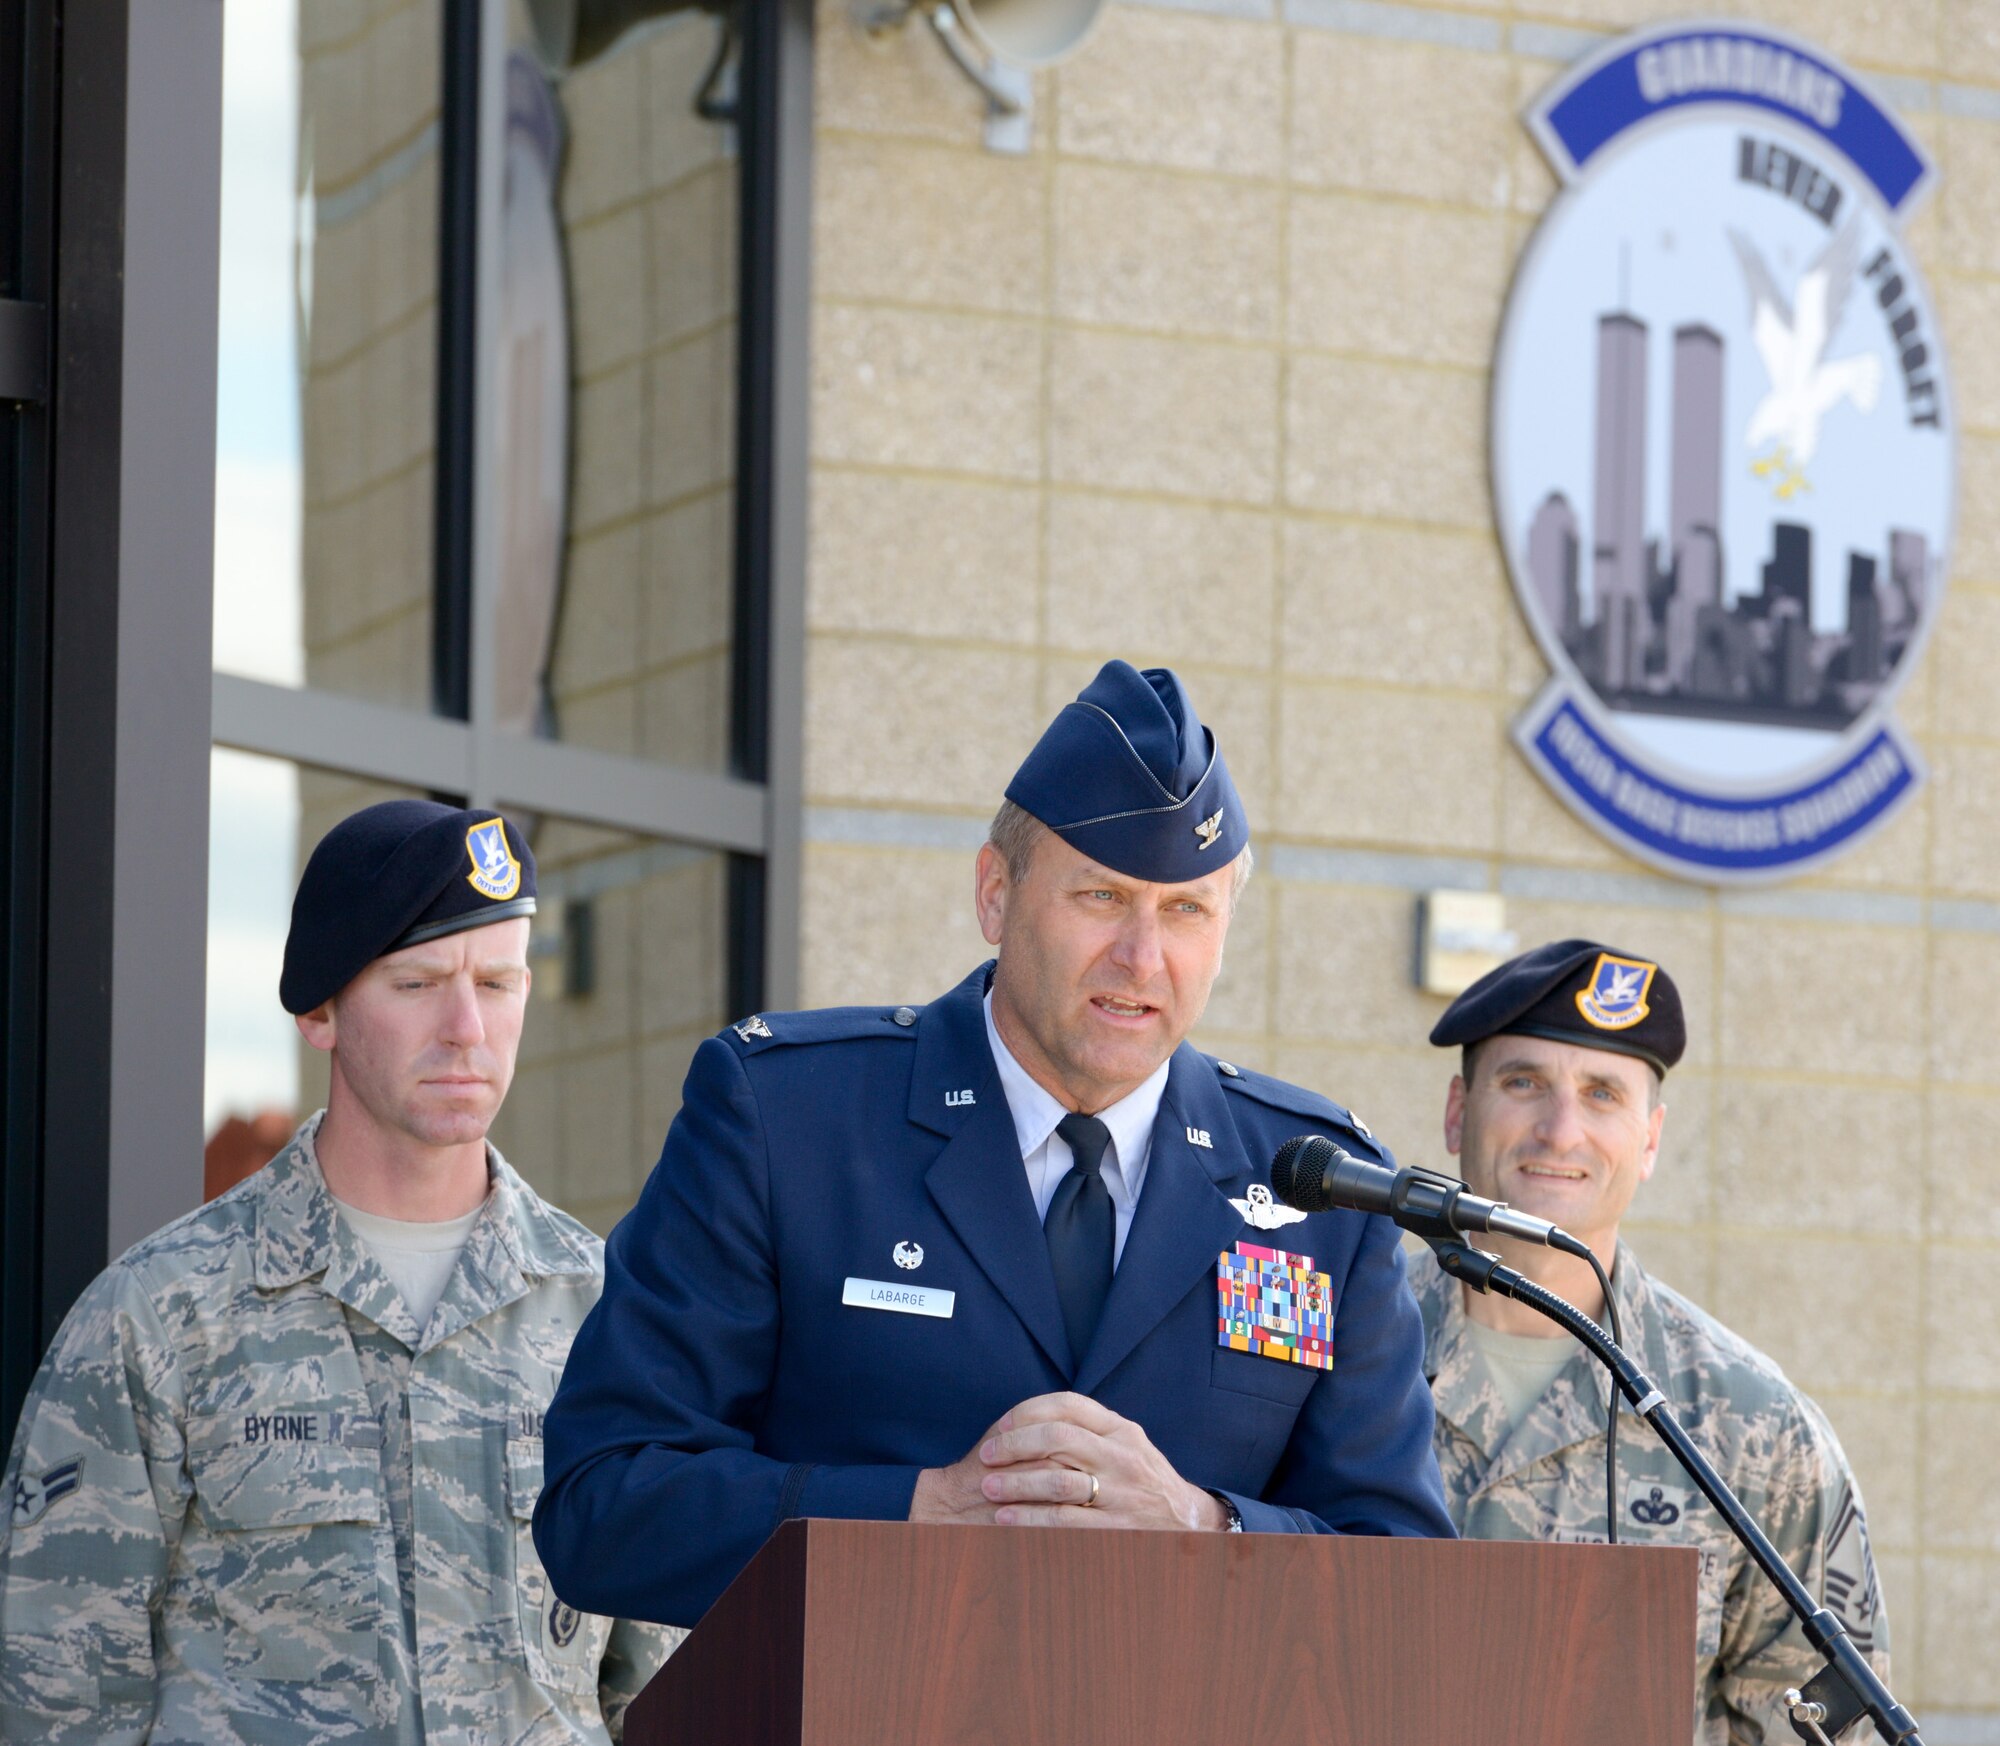 U.S. Air Force Col Timothy J. LaBarge, commander of the 105th Airlift Wing, New York Air National Guard, addresses guests, media and members of the military community of Stewart Air National Guard base at a ribbon cutting event to officially open the Wing's Base Defense Squadron Headquarters building. The opening was held shortly after the posthumous award of the Bronze Star Medal with Valor to SSgt. Todd "T.J." Lobraico on April 11, 2015. Lobraico Jr., a member of the 105th Airlift Wing, was killed in action in Afghanistan on Sept. 5, 2013, (U.S. Air National Guard photo by SSgt Michael OHalloran/Released) 